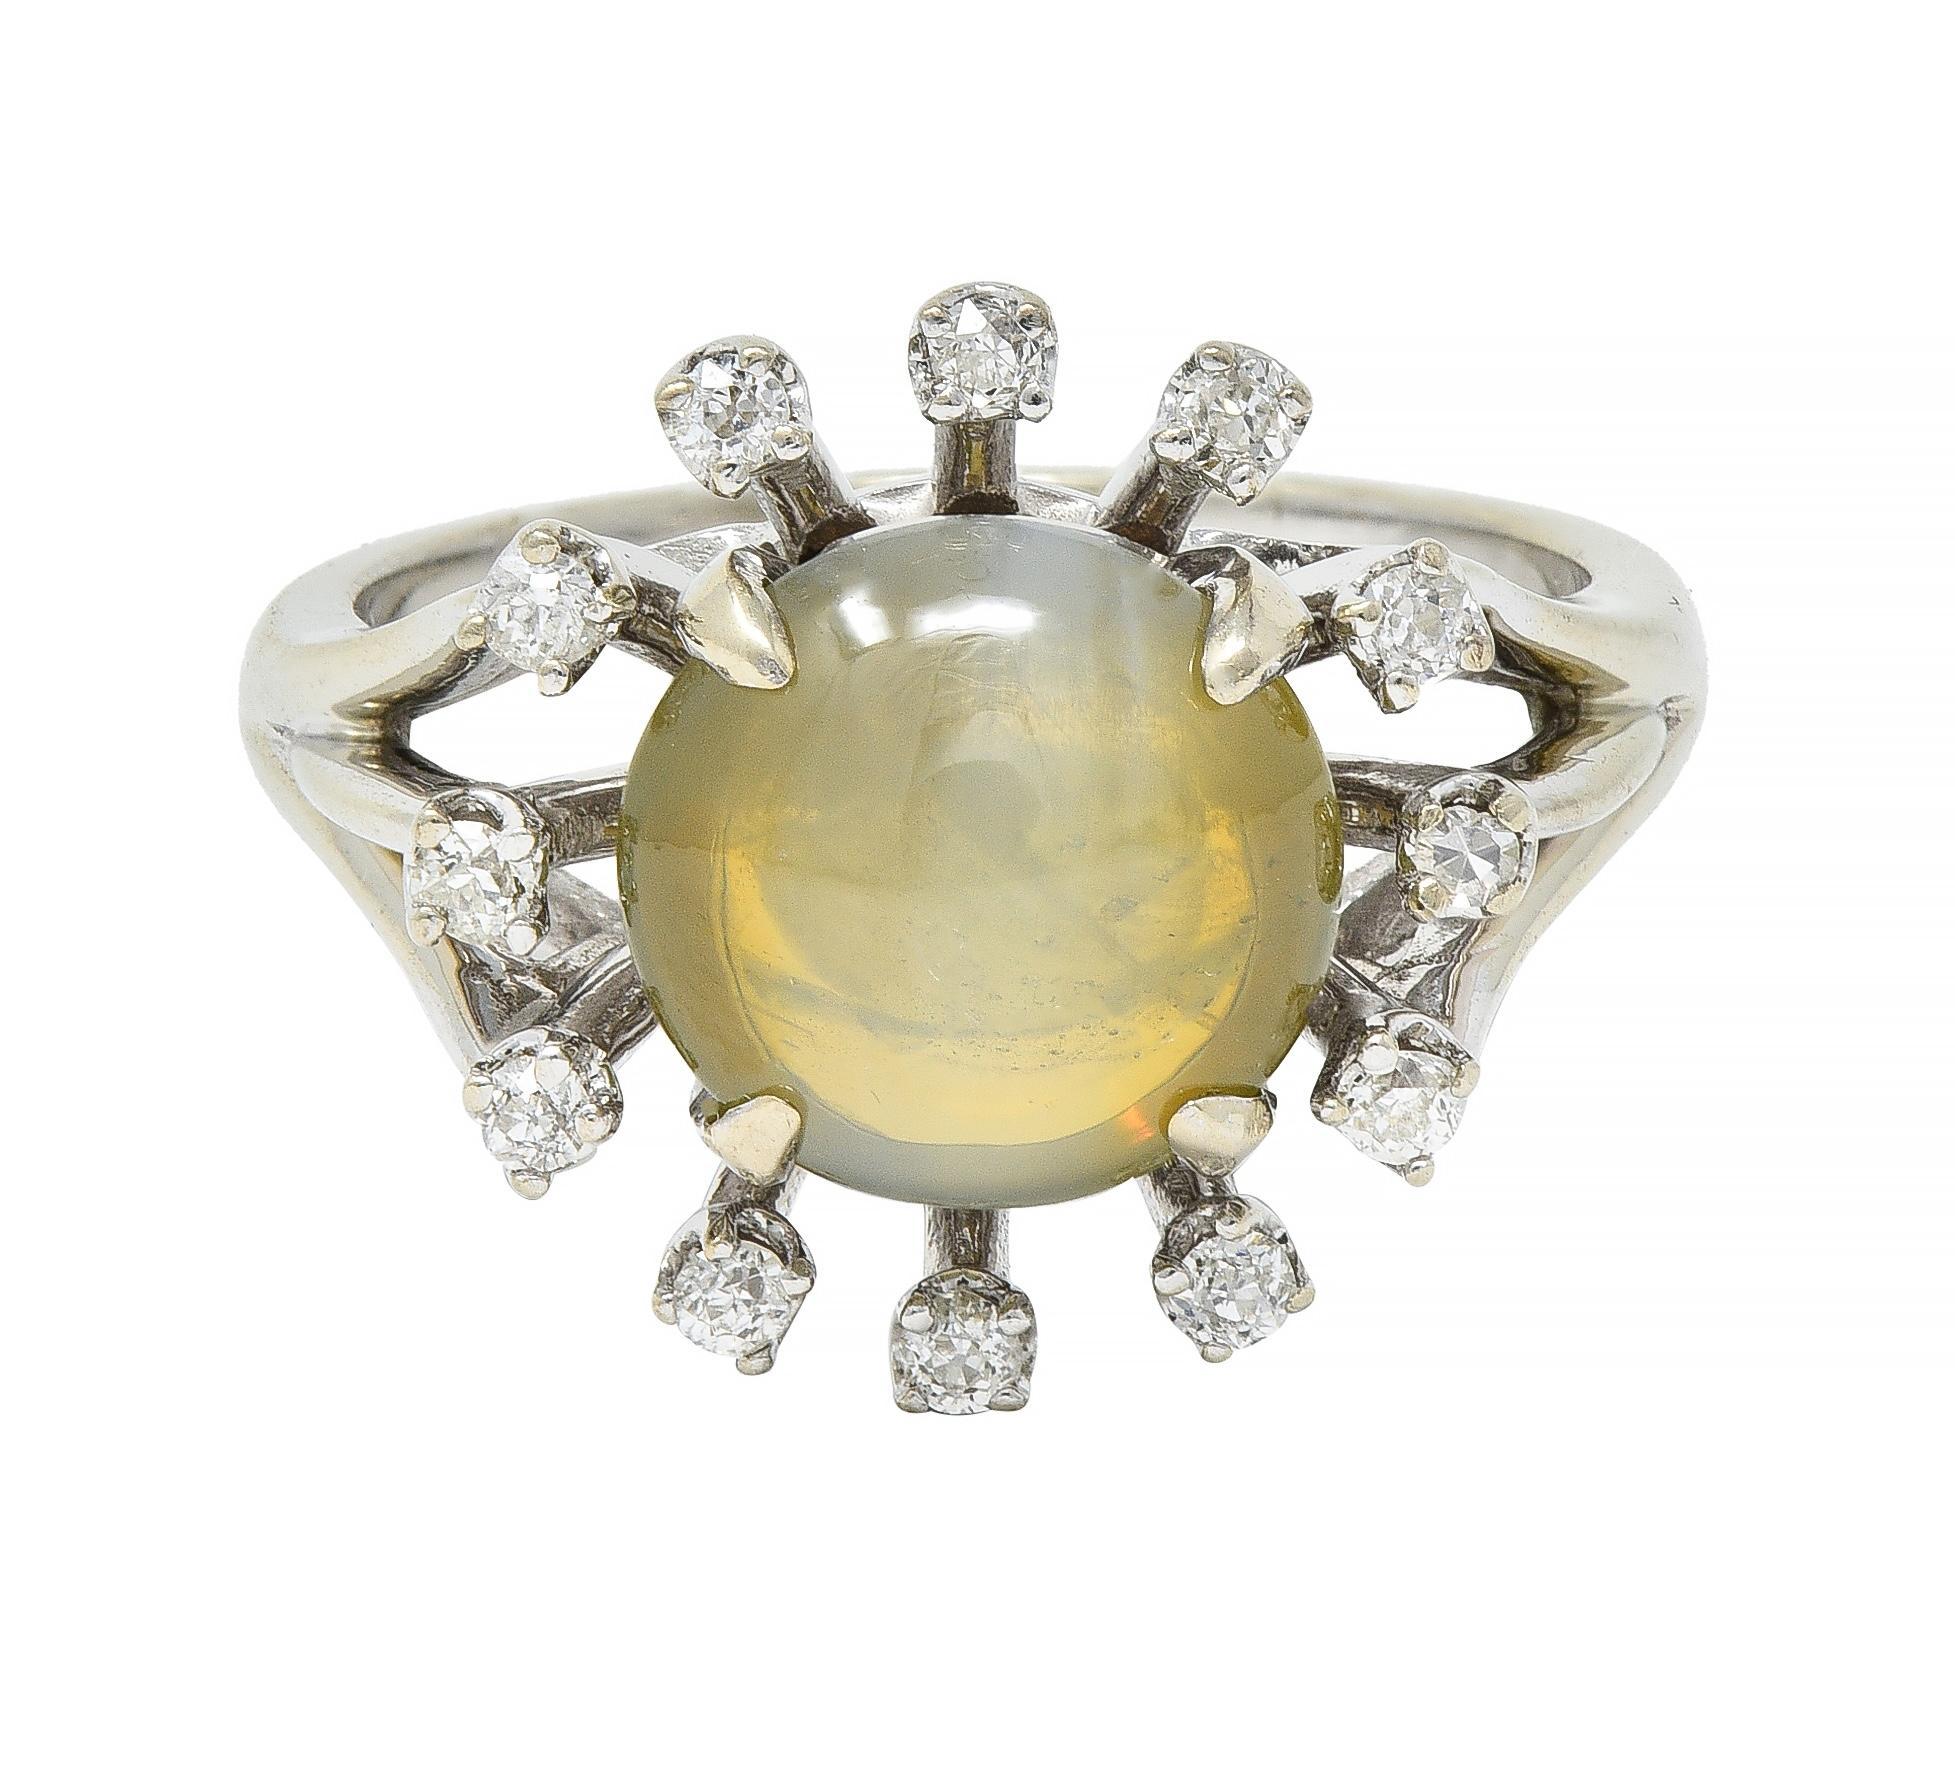 Centering a prong set round shaped cat's eye chrysoberyl cabochon measuring 8.5 mm round
Translucent yellowish green in color displaying linear chatoyancy with milk and honey effect
With a floating halo surround of prong set single cut